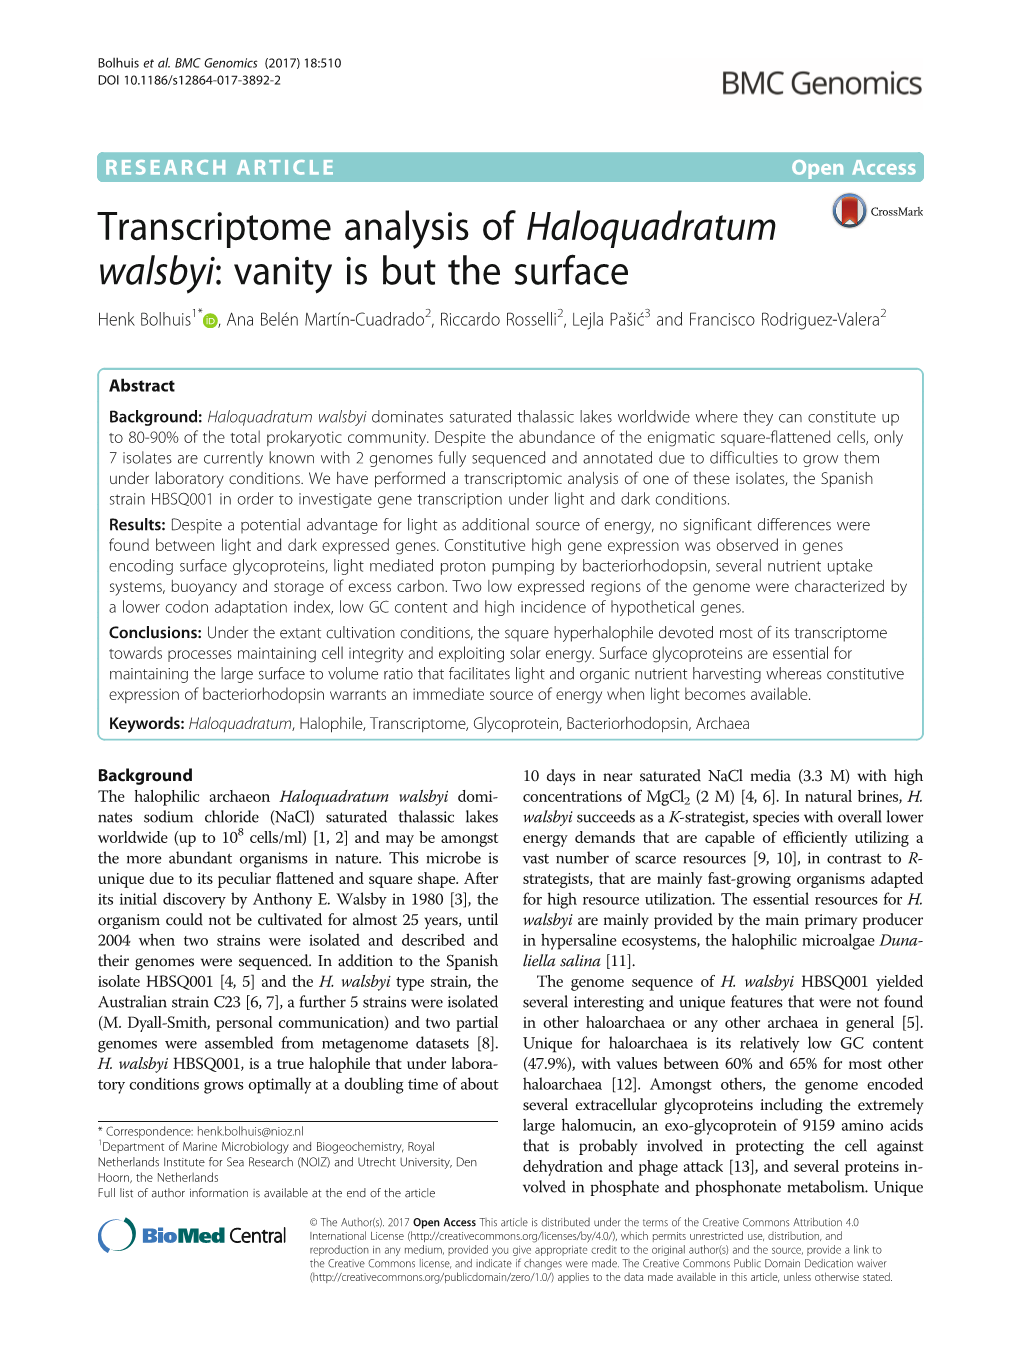 Transcriptome Analysis of Haloquadratum Walsbyi: Vanity Is but the Surface